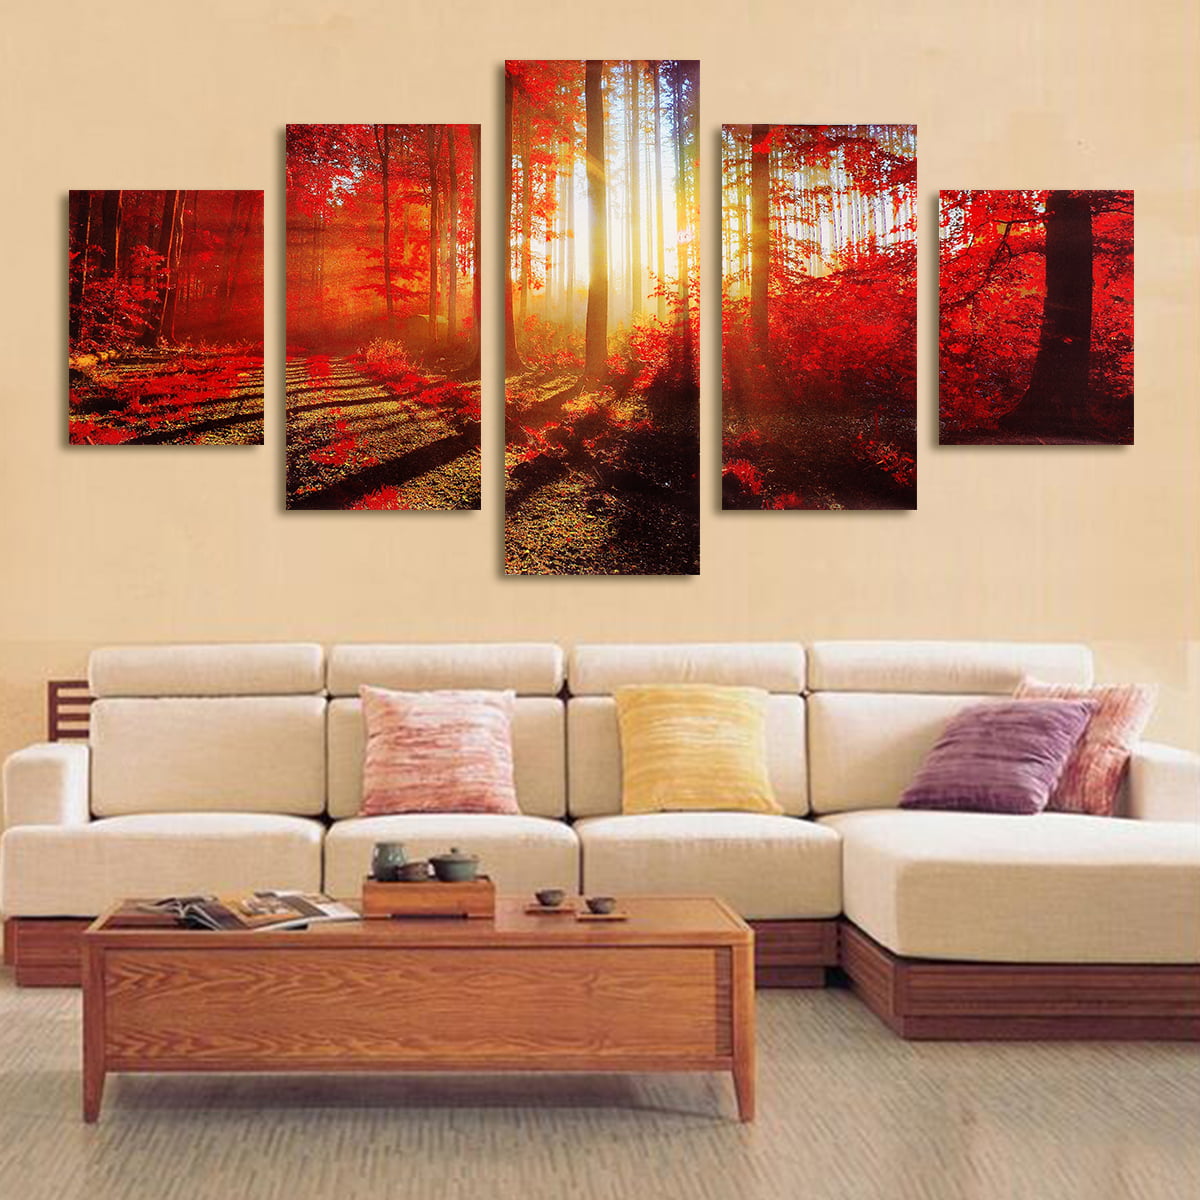 Custom Made Canvas Painting Printed Wall Art Poster Home Decor Picture 5PCS